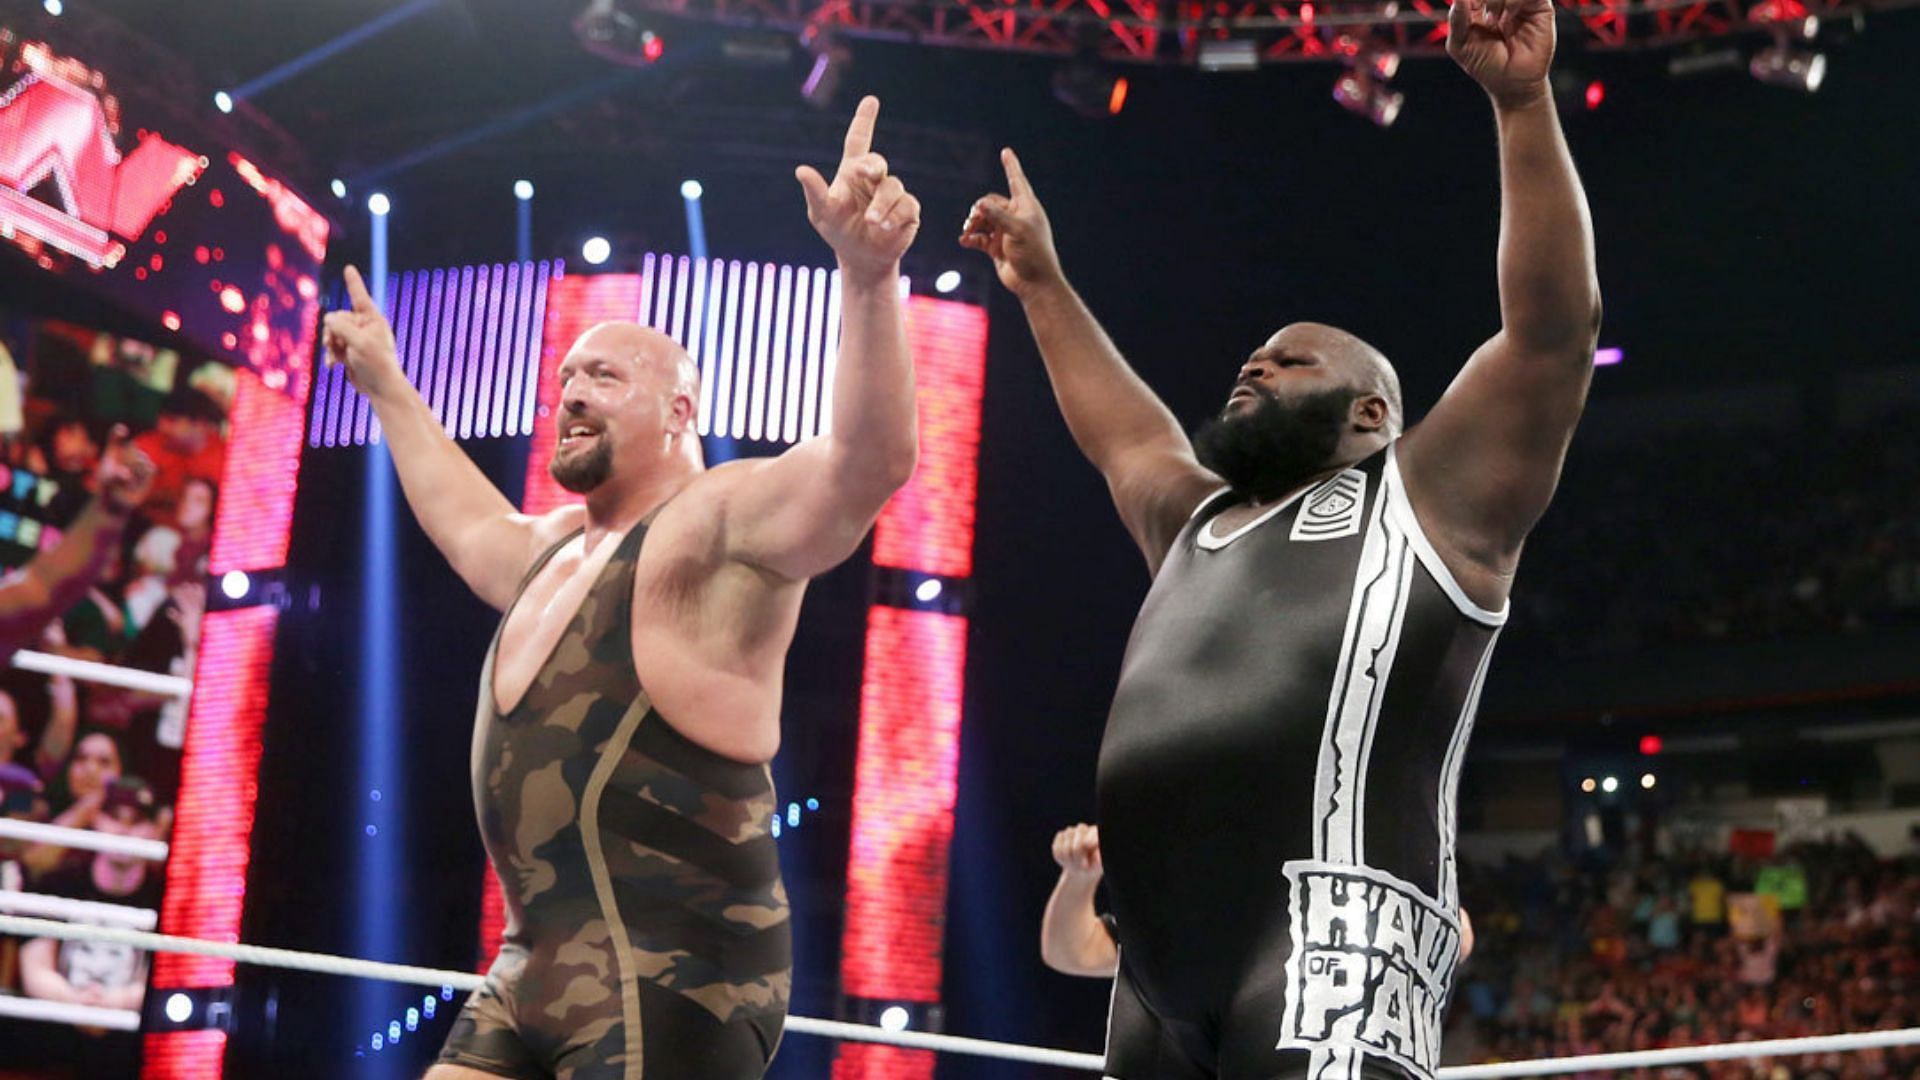 Paul Wight (The Big Show) and Mark Henry are former WWE World Champions